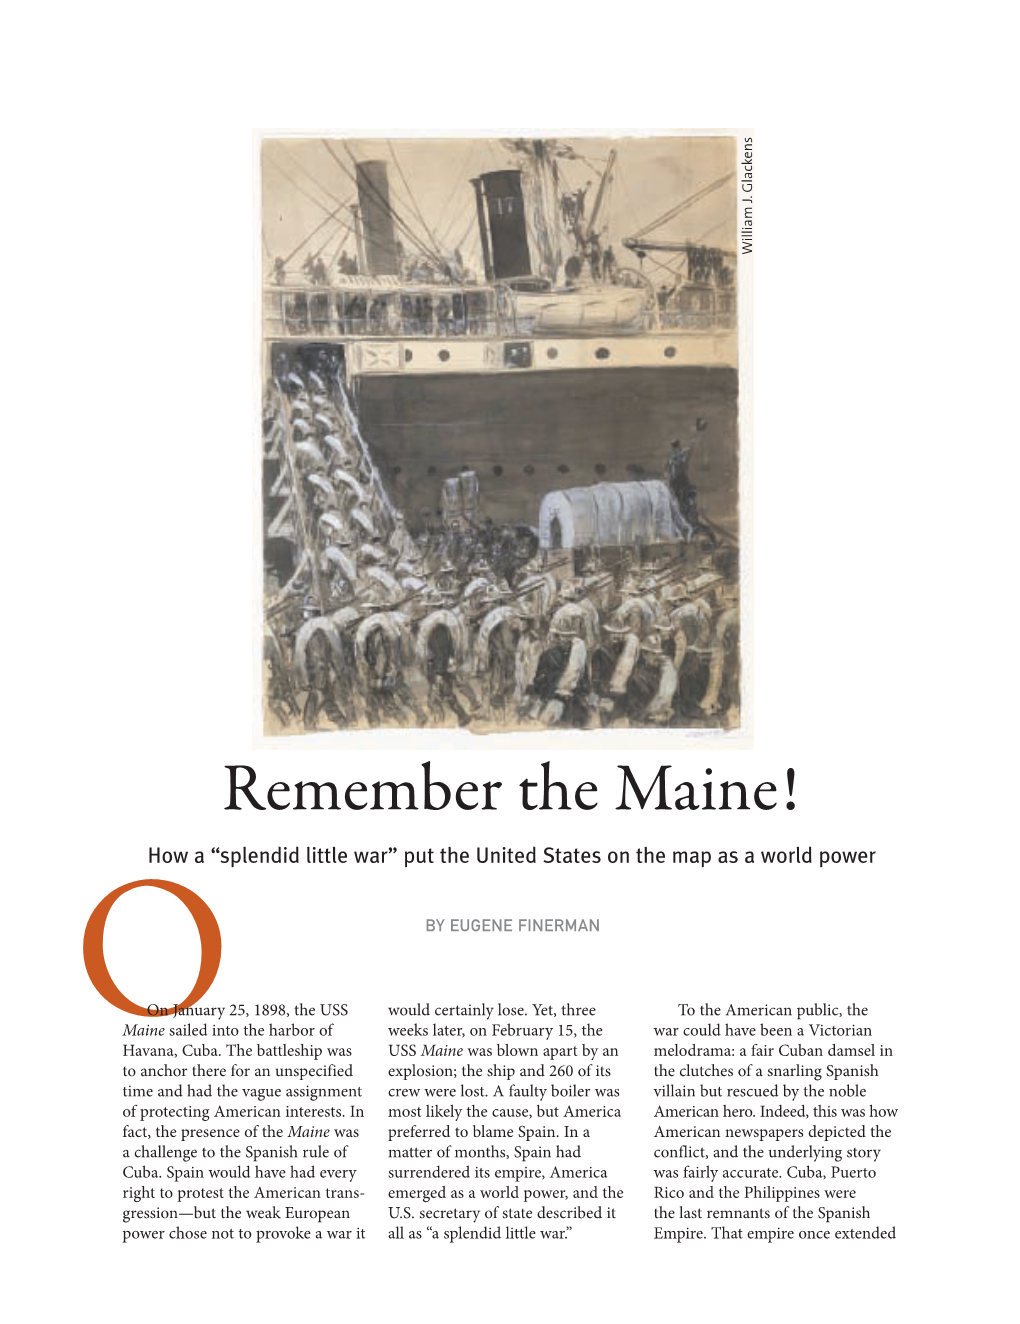 Remember the Maine! How a “Splendid Little War” Put the United States on the Map As a World Power